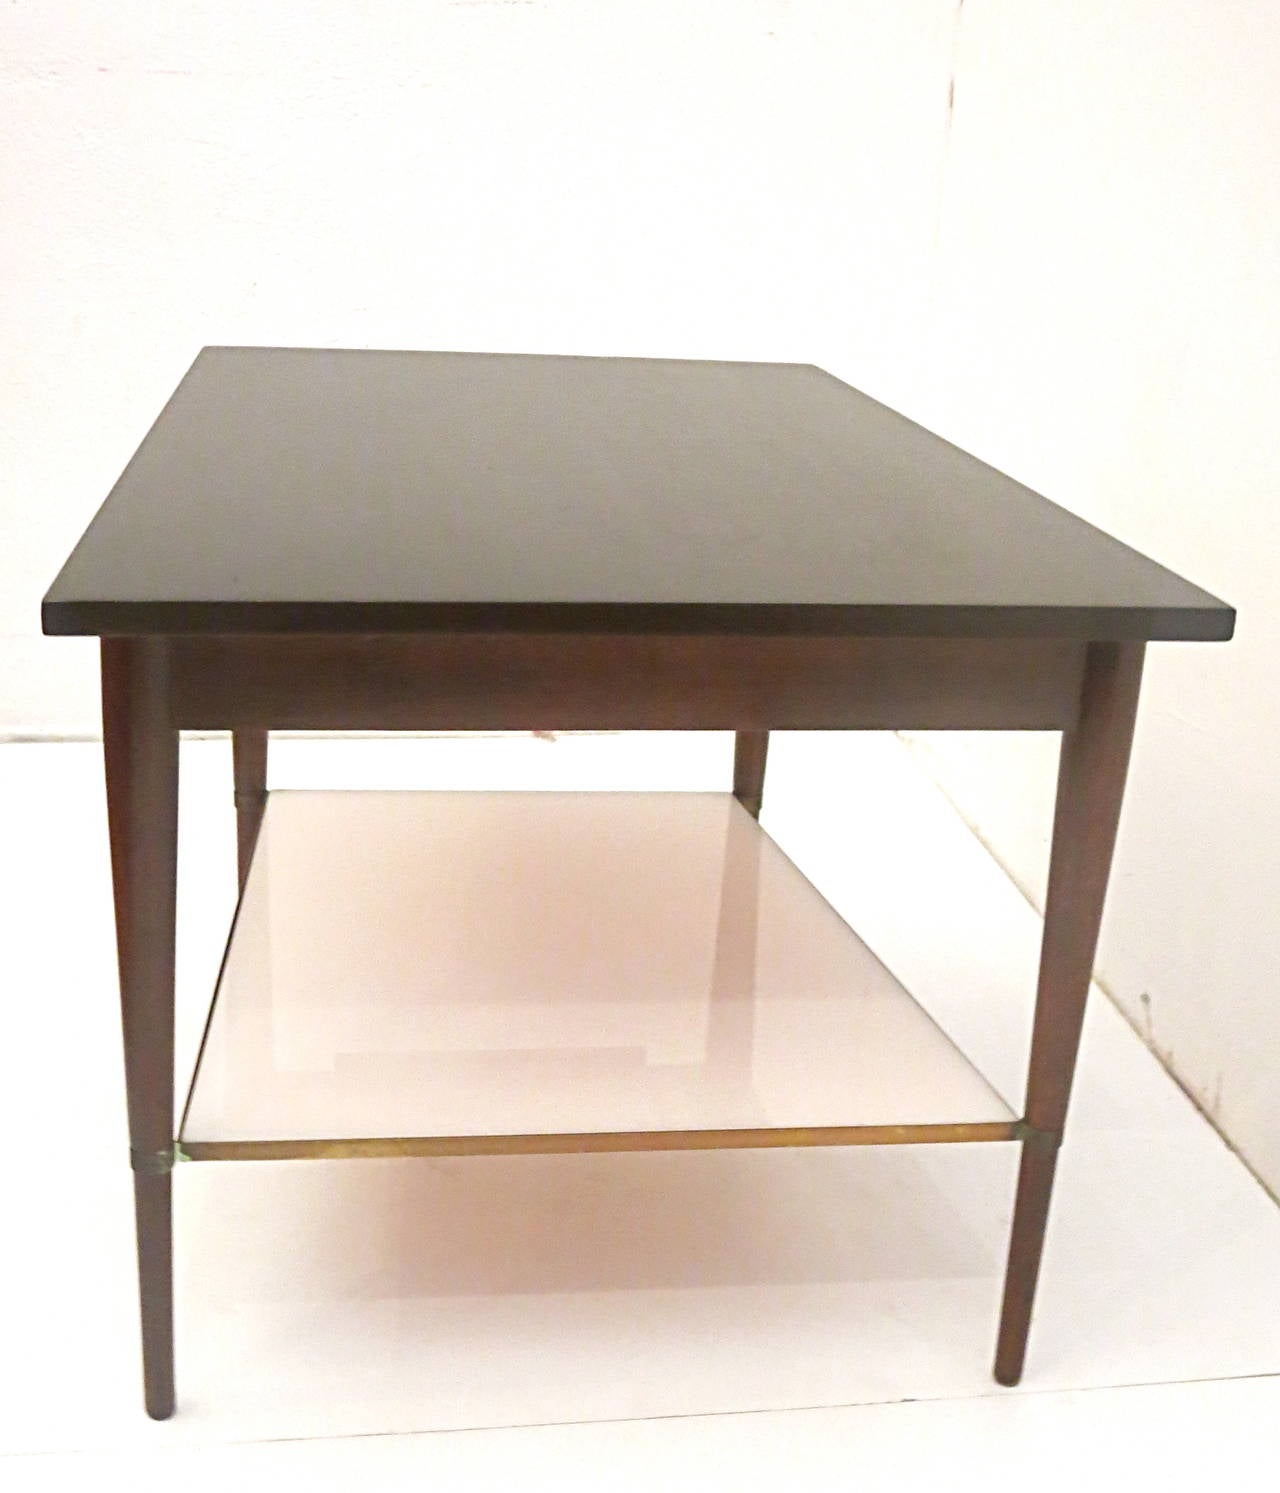 American Mid-Century Paul McCobb Wedge Table Mod.7014, Connoisseur Collection